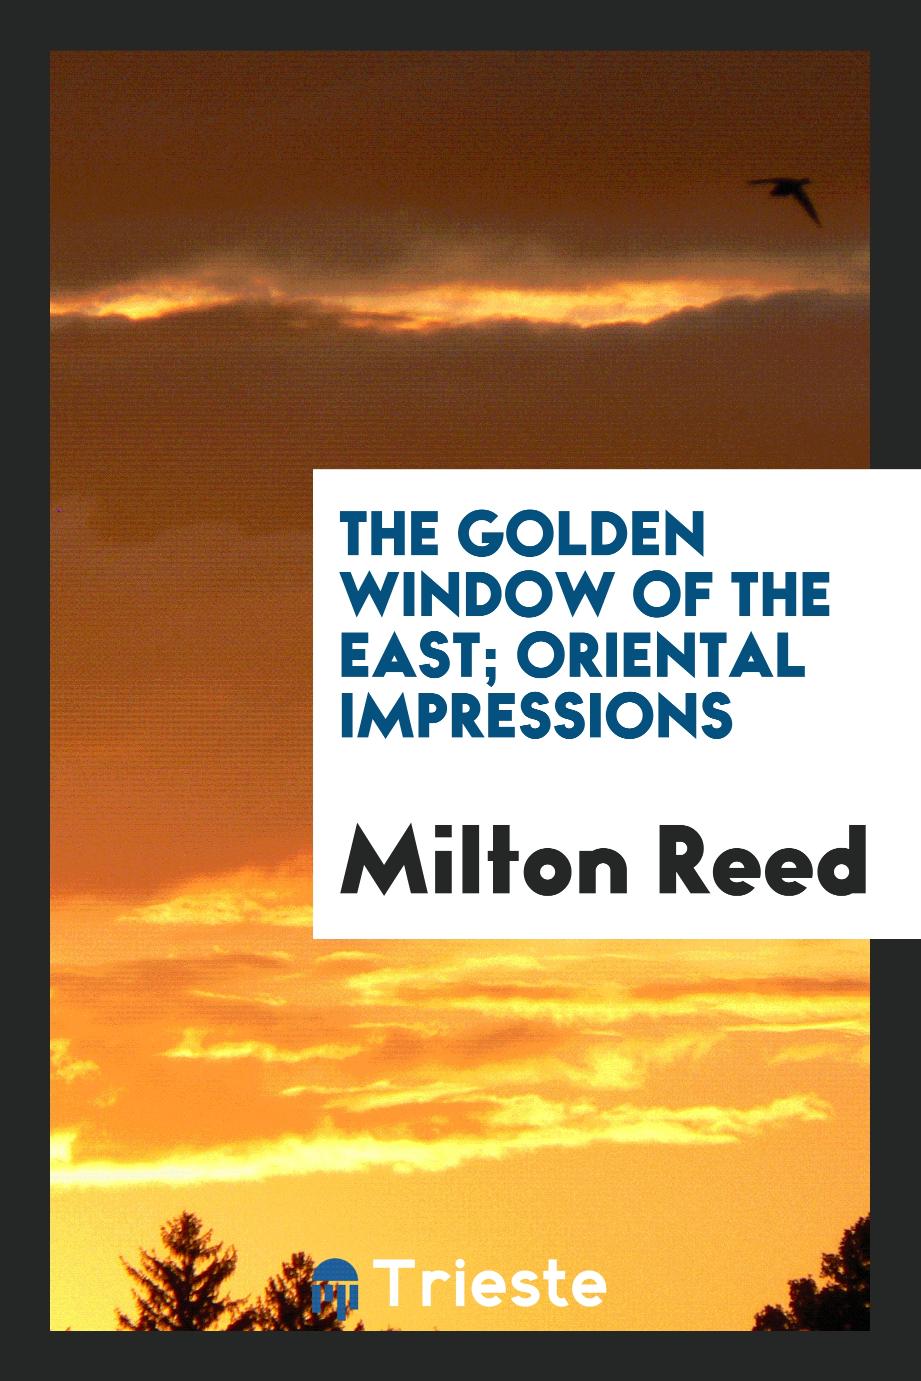 The golden window of the East; oriental impressions